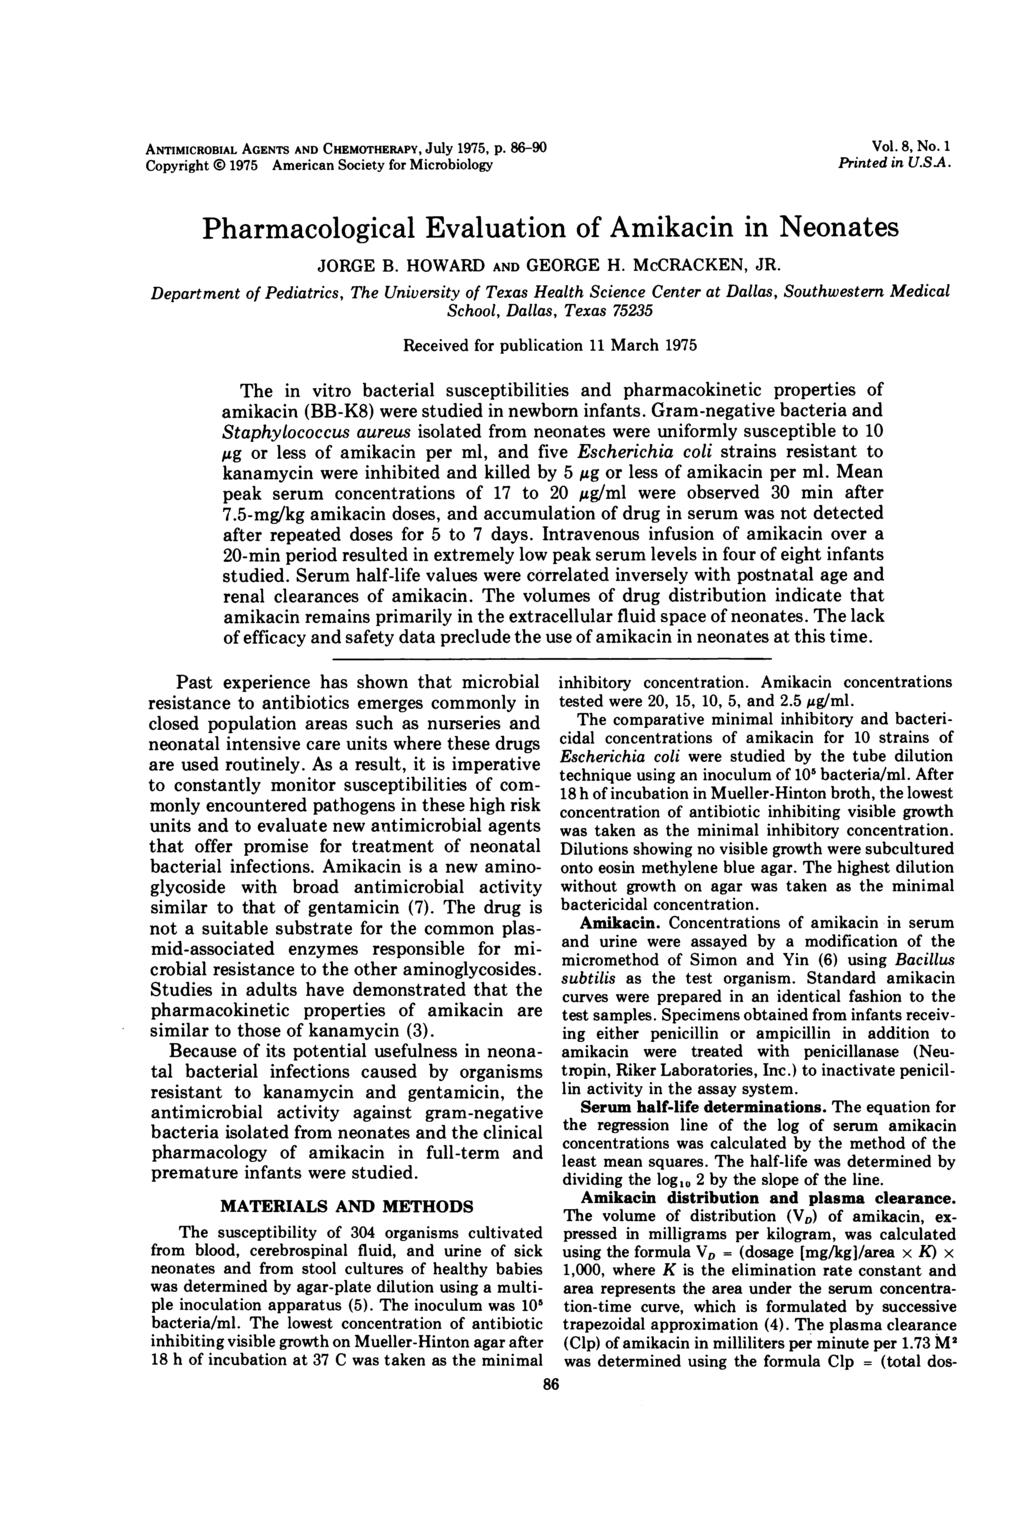 ANTIMICROBIAL AGENTS AND CHEMOTHERAPY, JUlY 1975, p. 86-90 Copyright 0 1975 American Society for Microbiology Vol. 8, No. 1 Printed in U.SA. Pharmacological Evaluation of Amikacin in Neonates JORGE B.